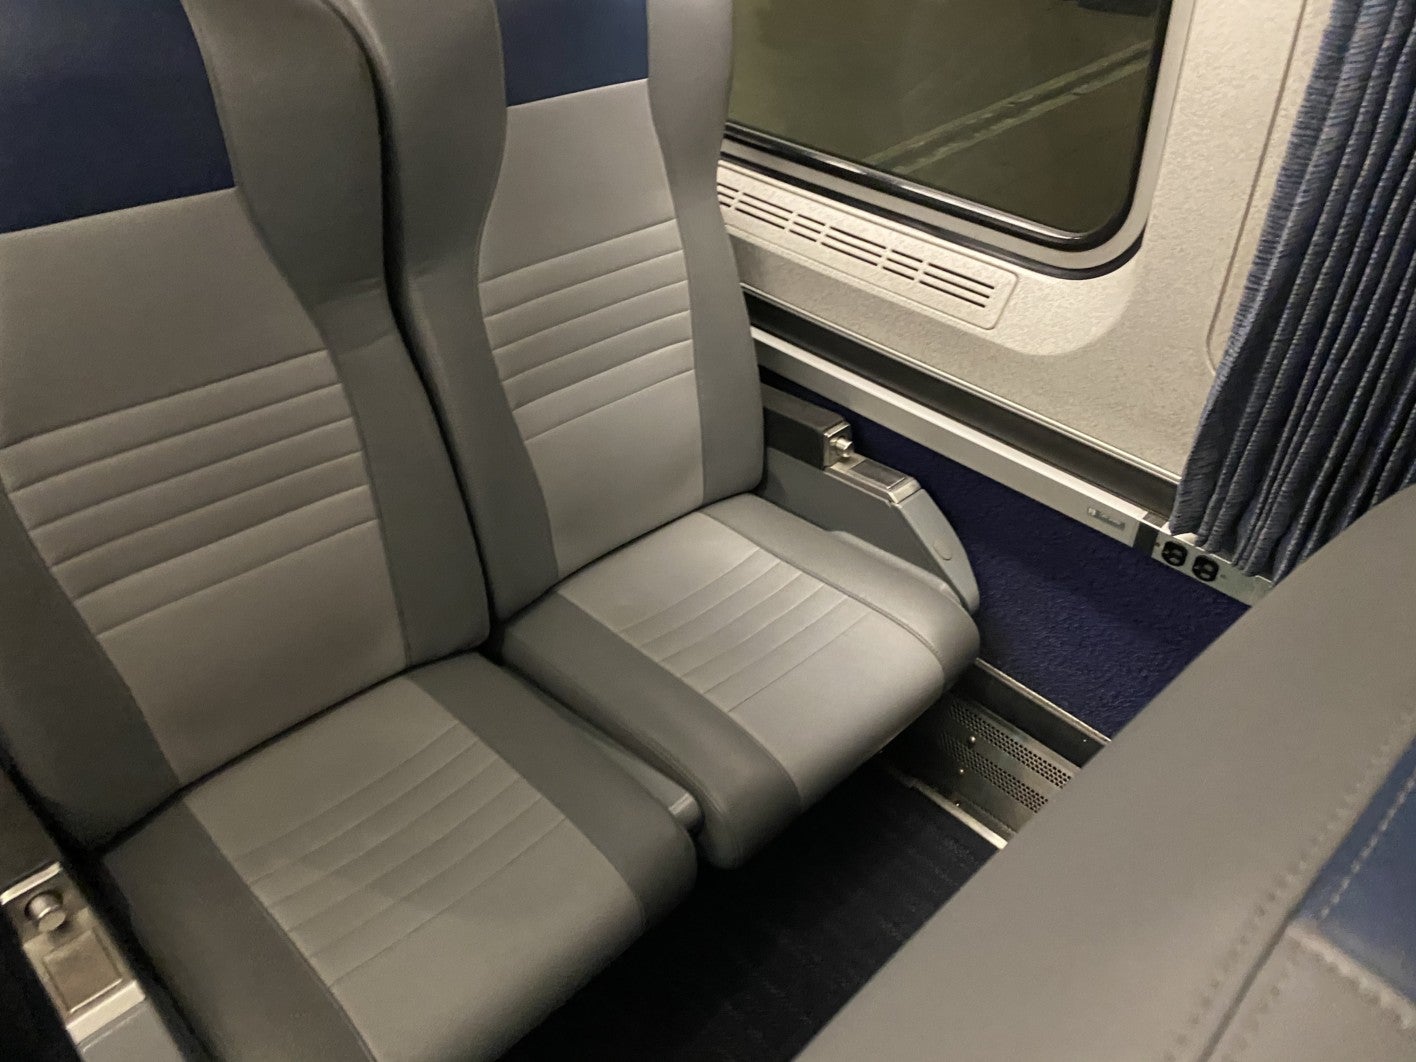 seat assignments on amtrak